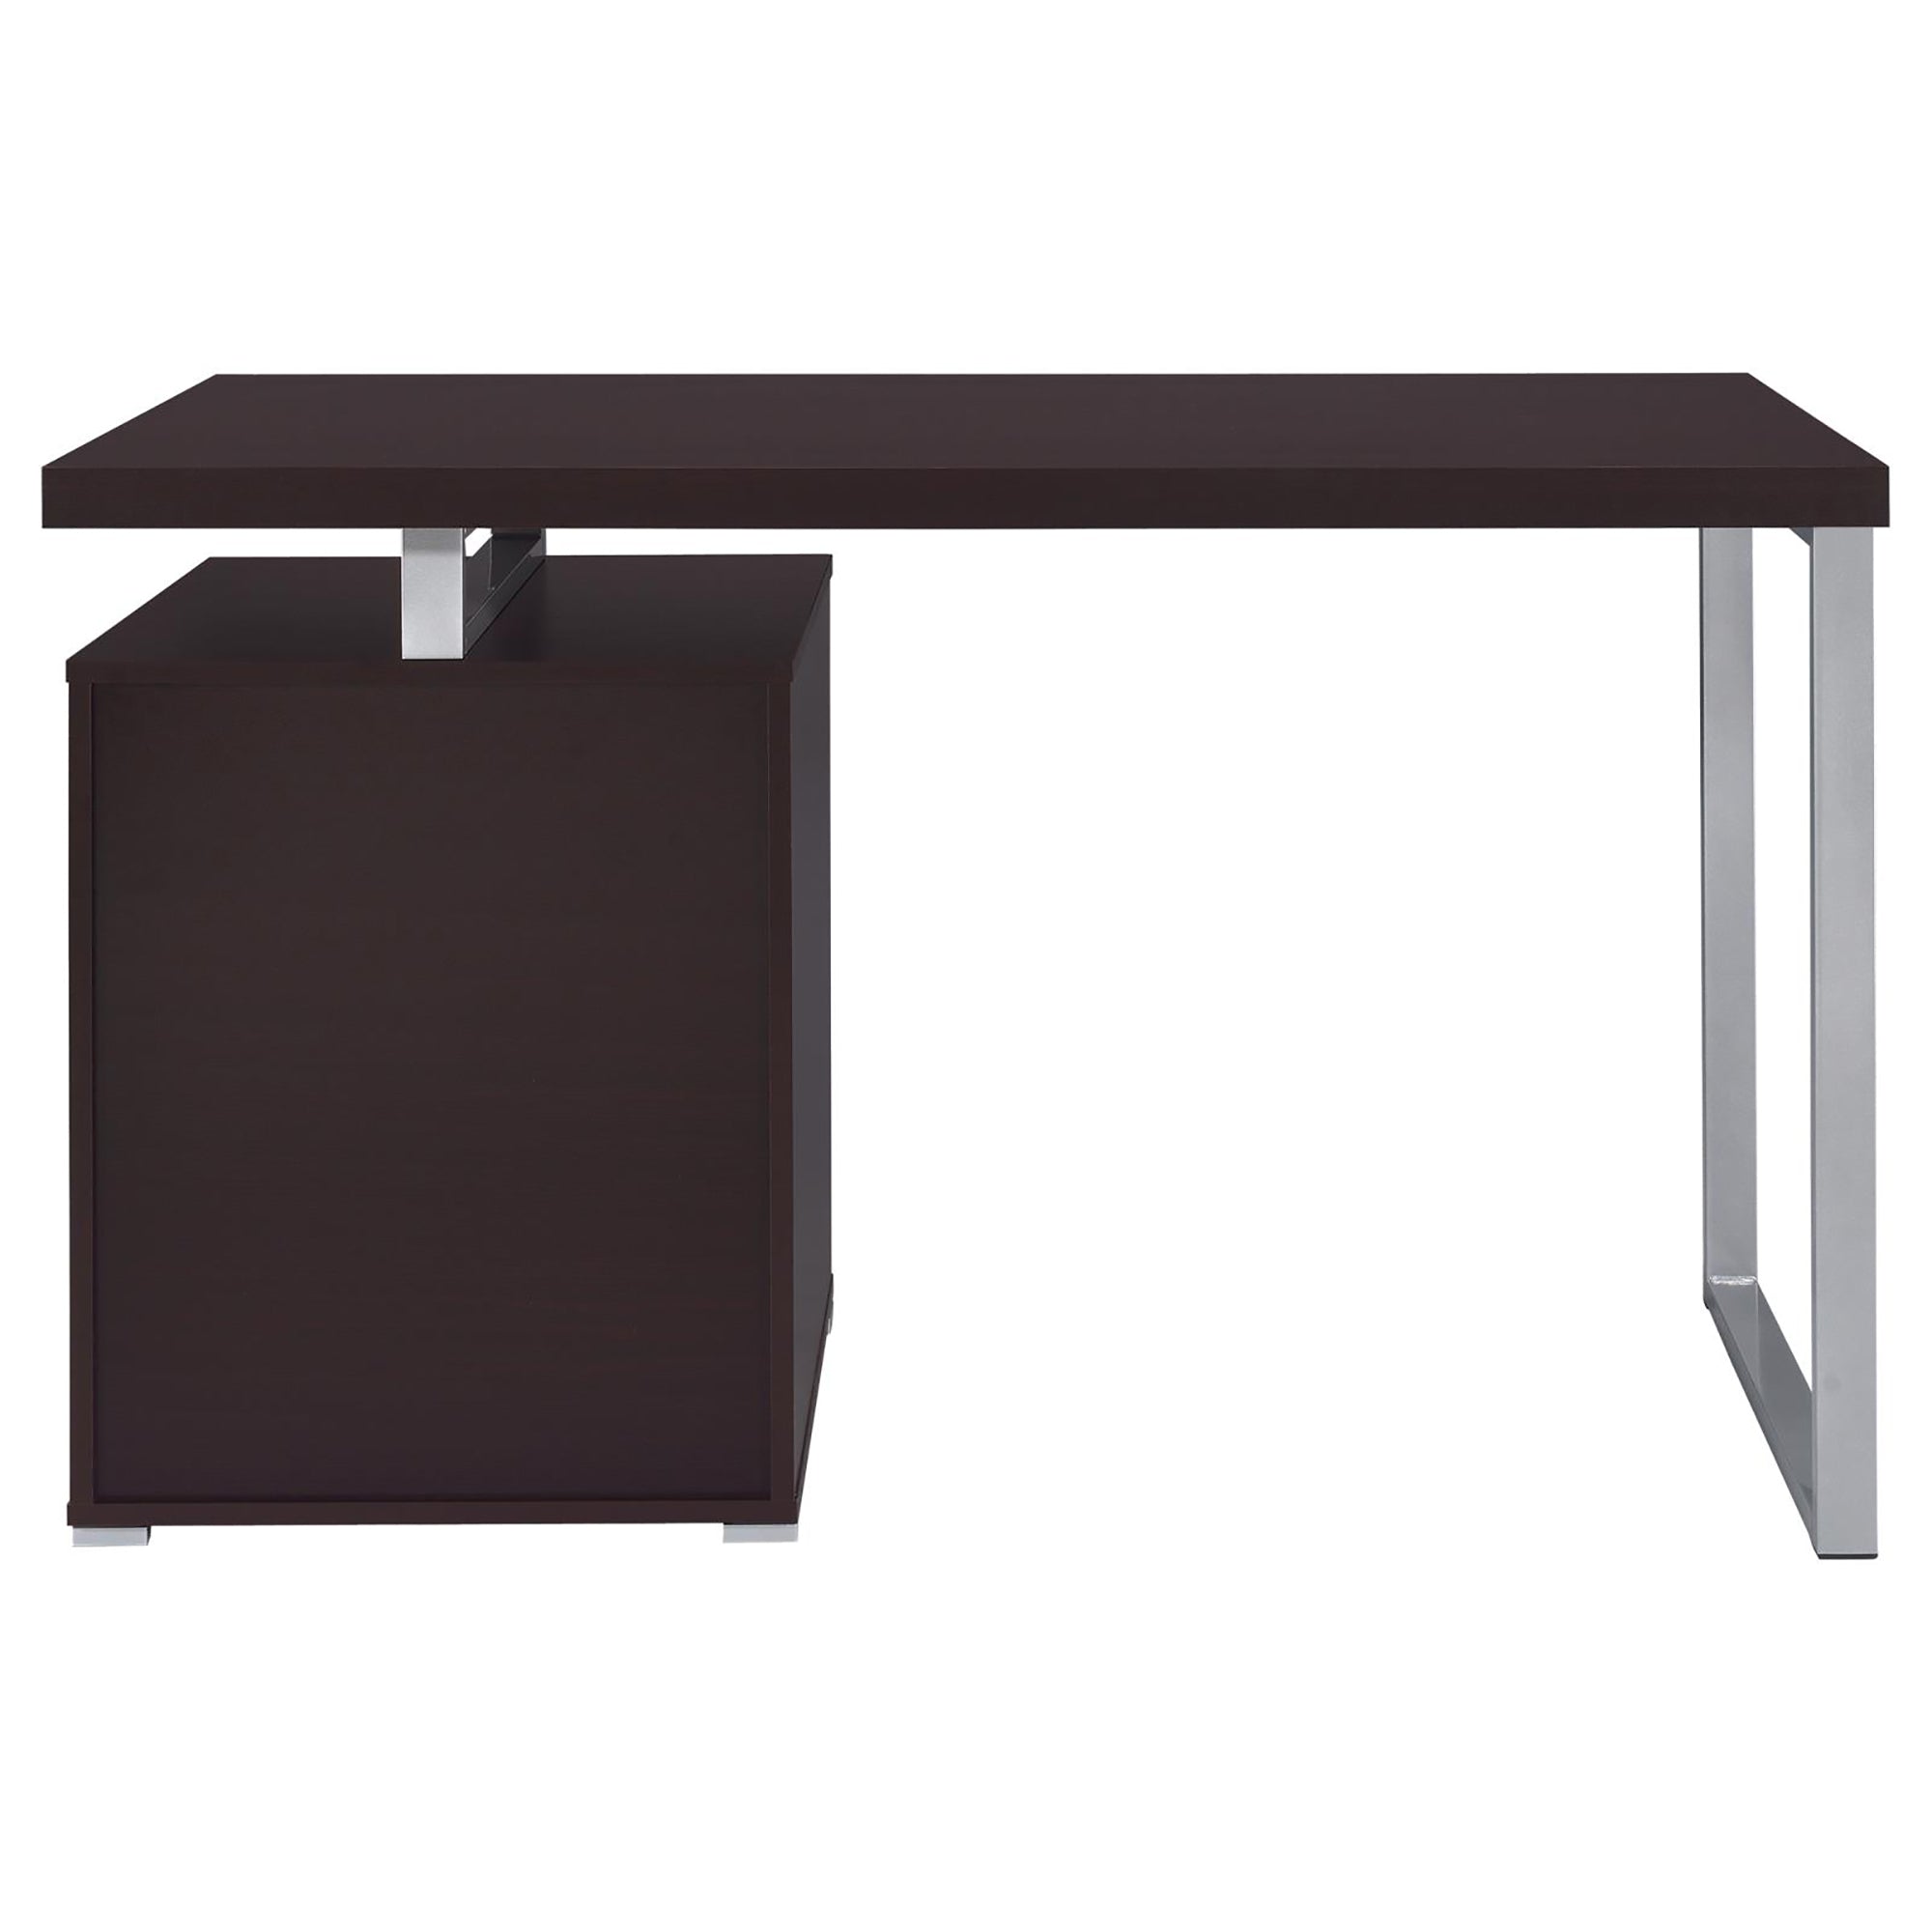 Cappuccino 3 drawer Reversible Office Desk cappuccino-brown-computer